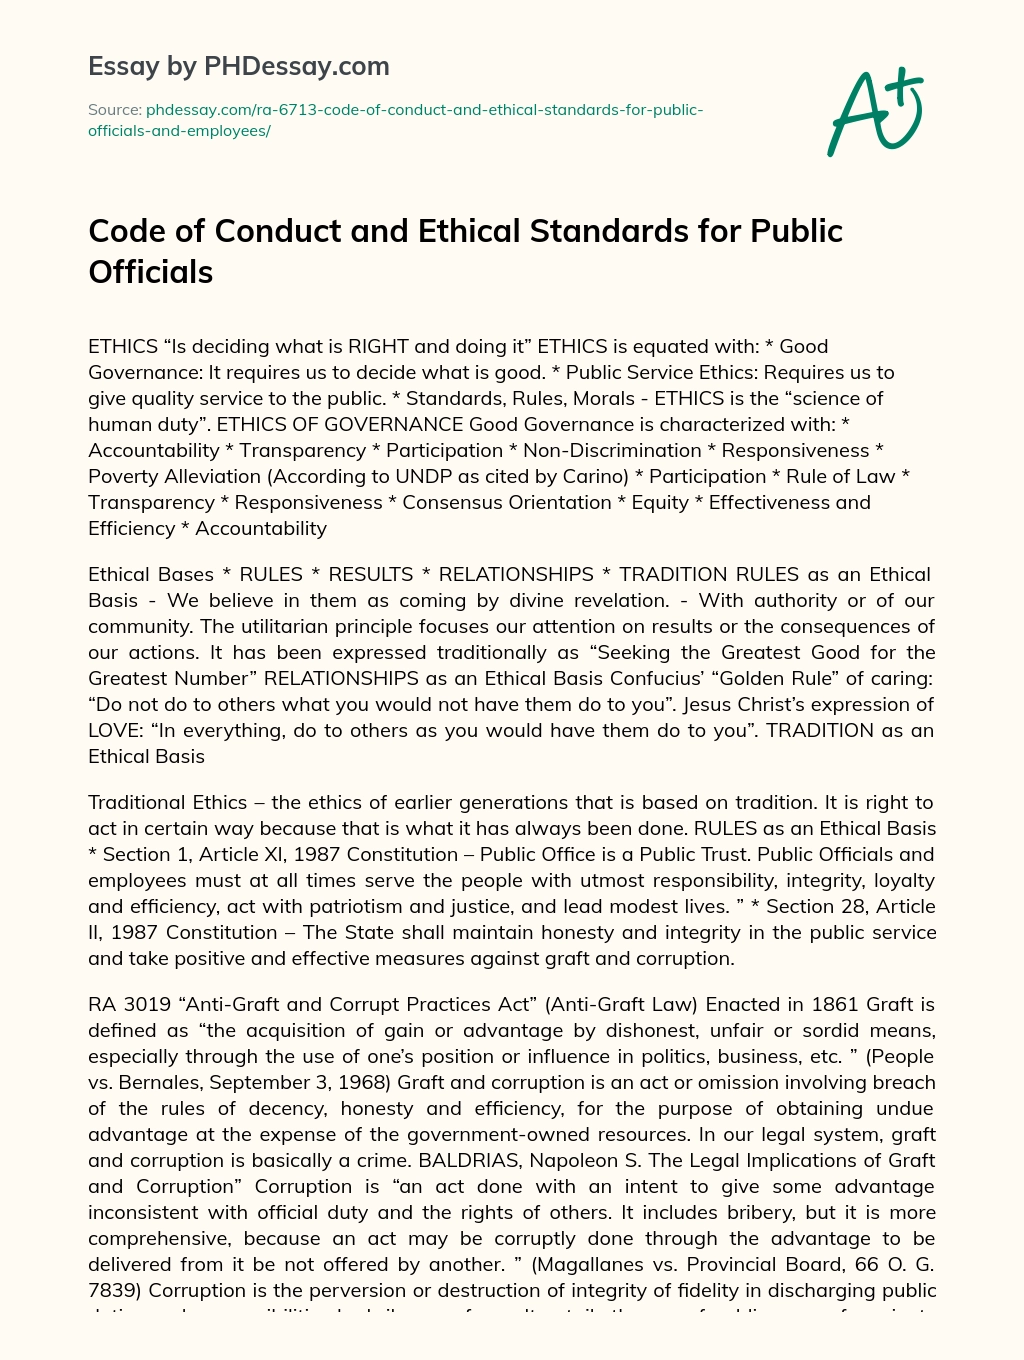 Code of Conduct and Ethical Standards for Public Officials essay